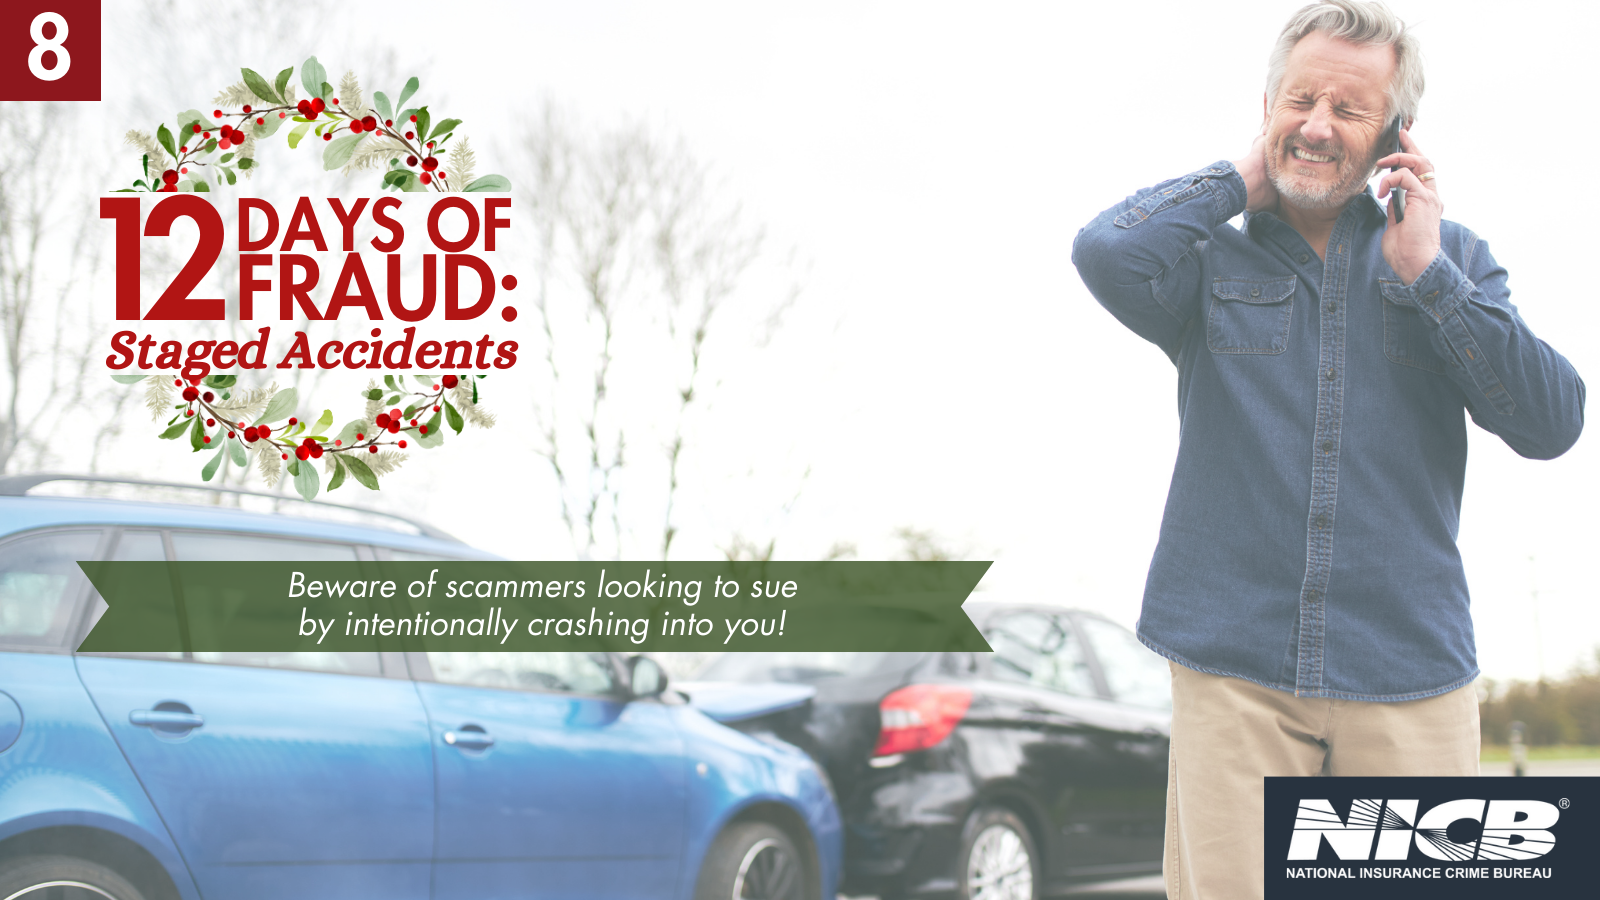 Beware of scammers looking to sue by intentionally crashing into you!